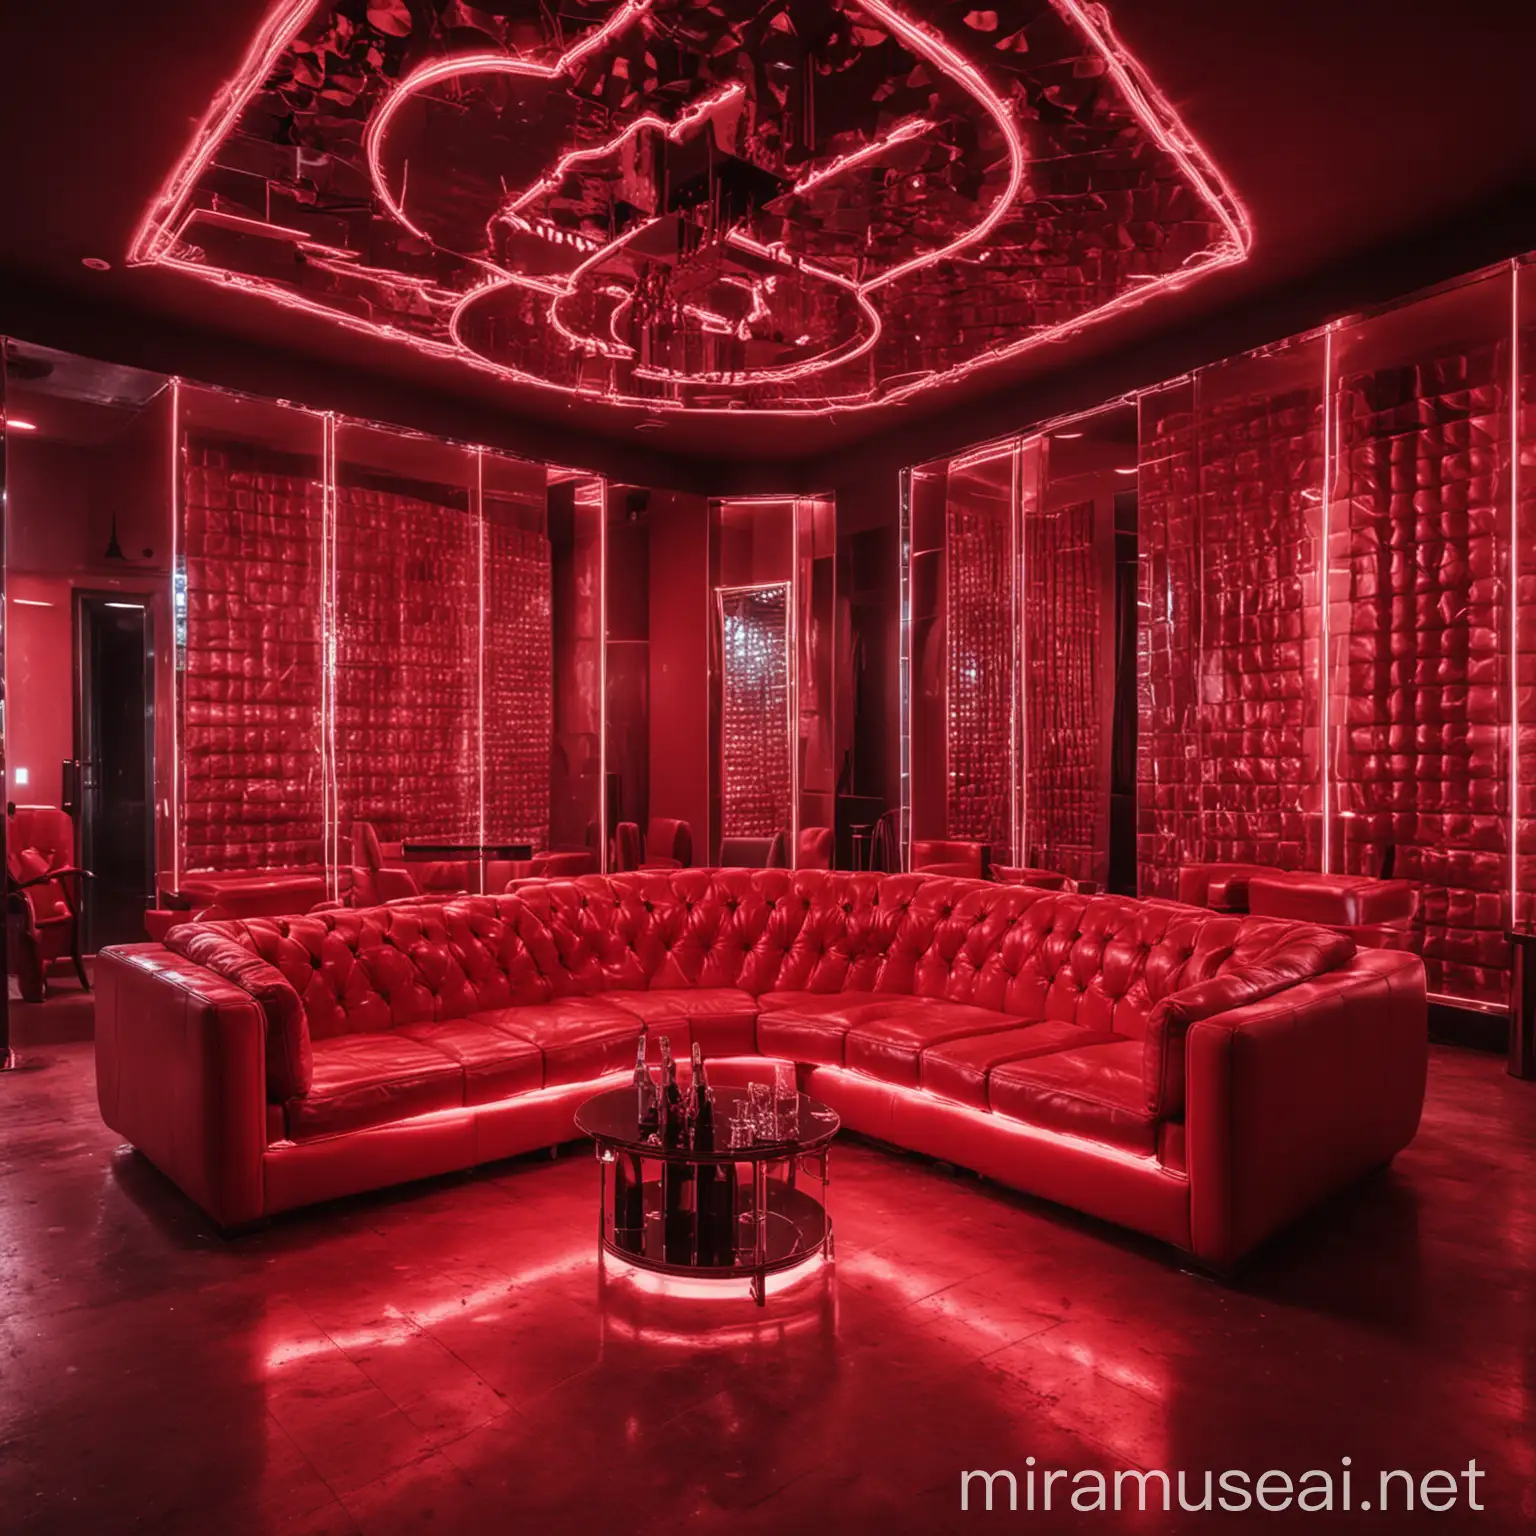 Vibrant Red Neon Nightclub with Red Sofas